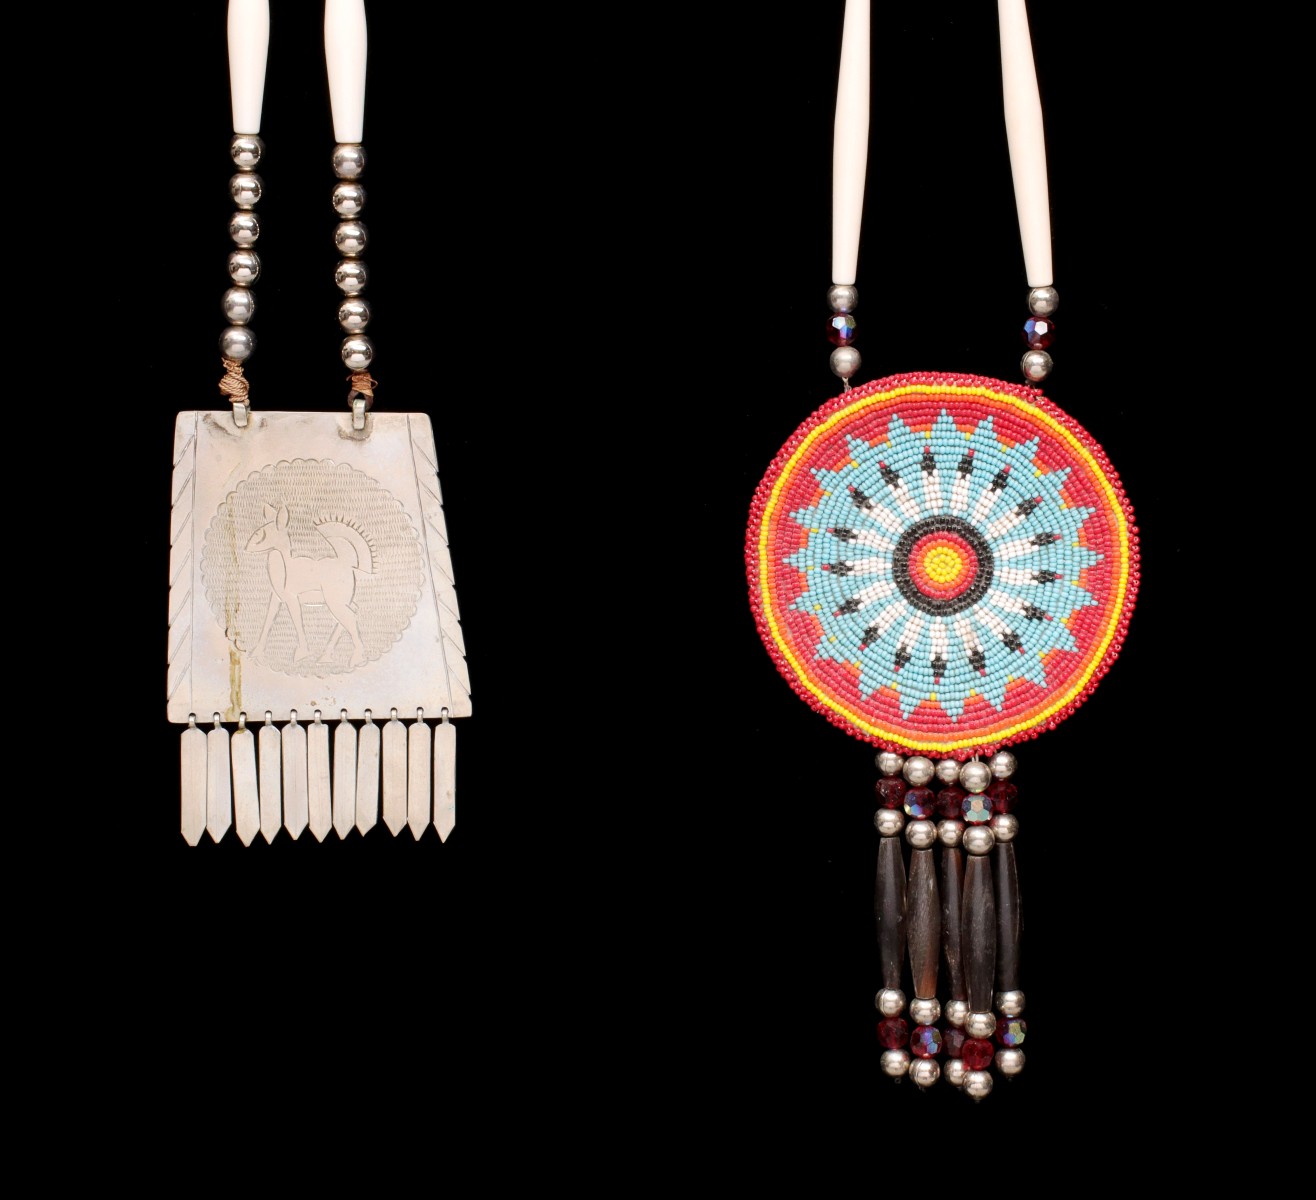 TWO NATIVE AMERICAN HAIR PIPE TUBE BEAD NECKLACES